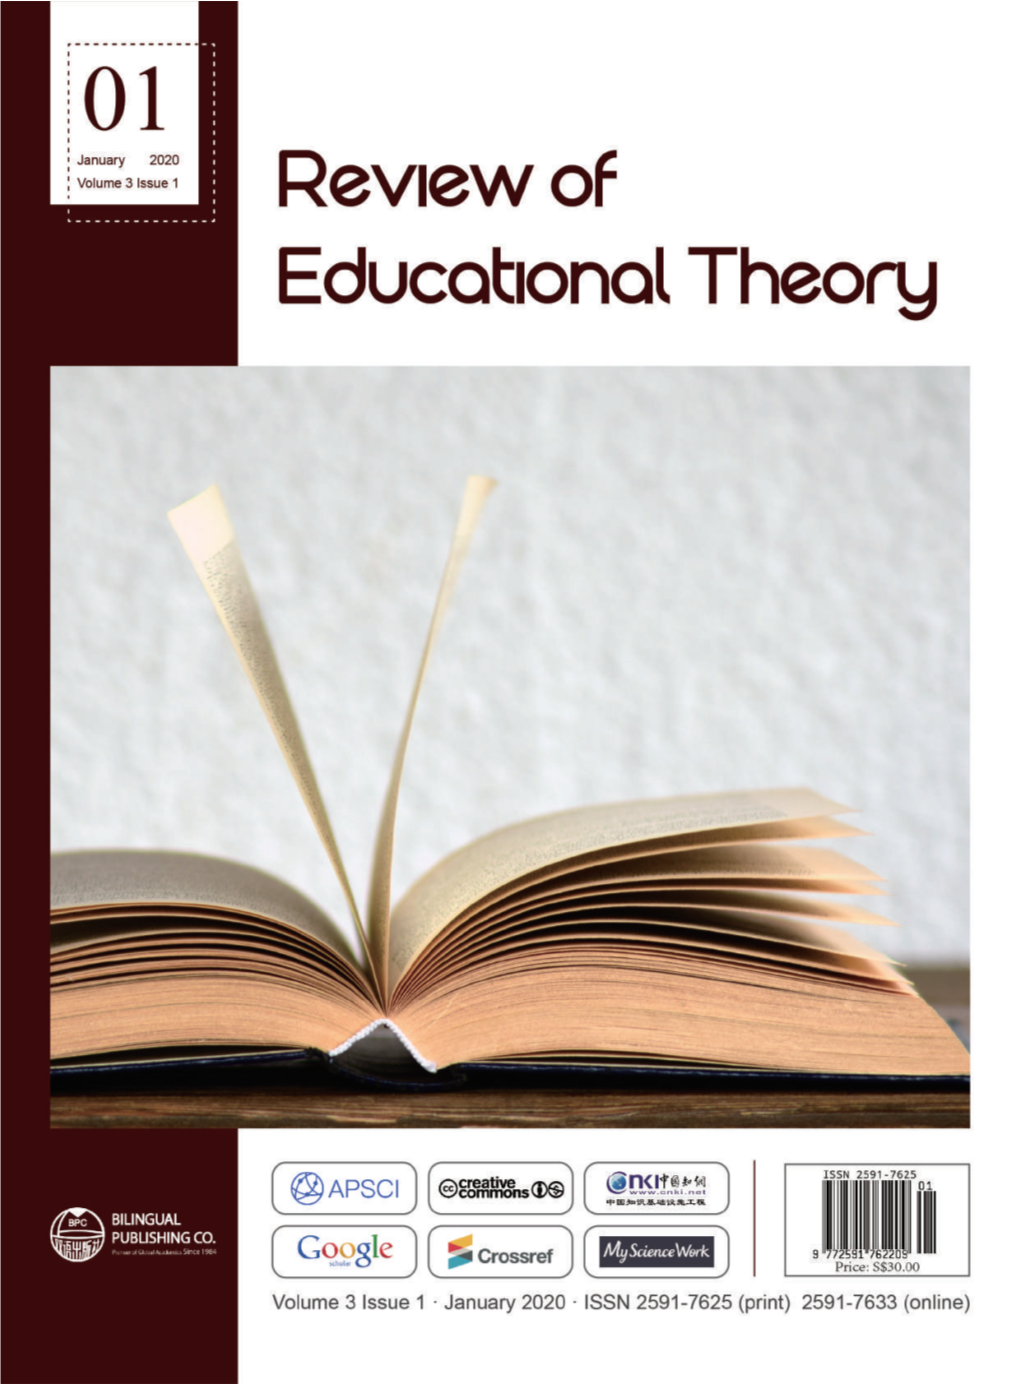 Review of Educational Theory